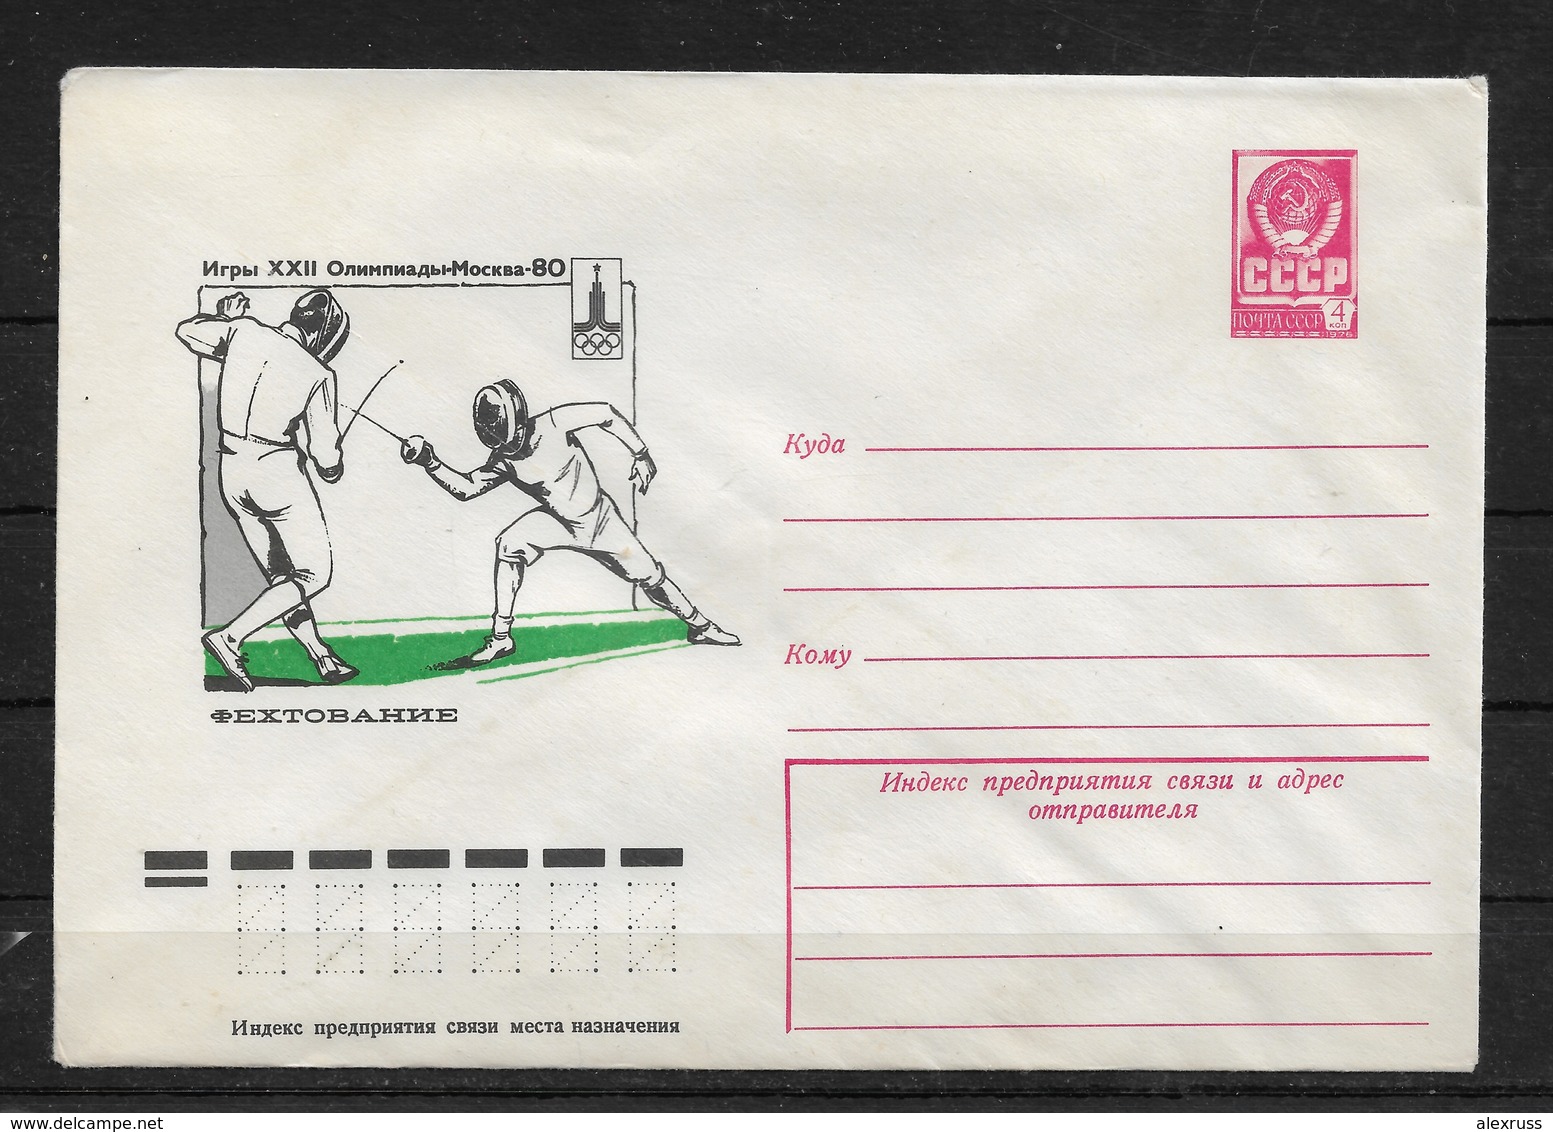 Russia/USSR 1980, Cachet Cover, Moscow'80 Olympics, Fencing,VF Unused ! RARE (NR50) - Fencing